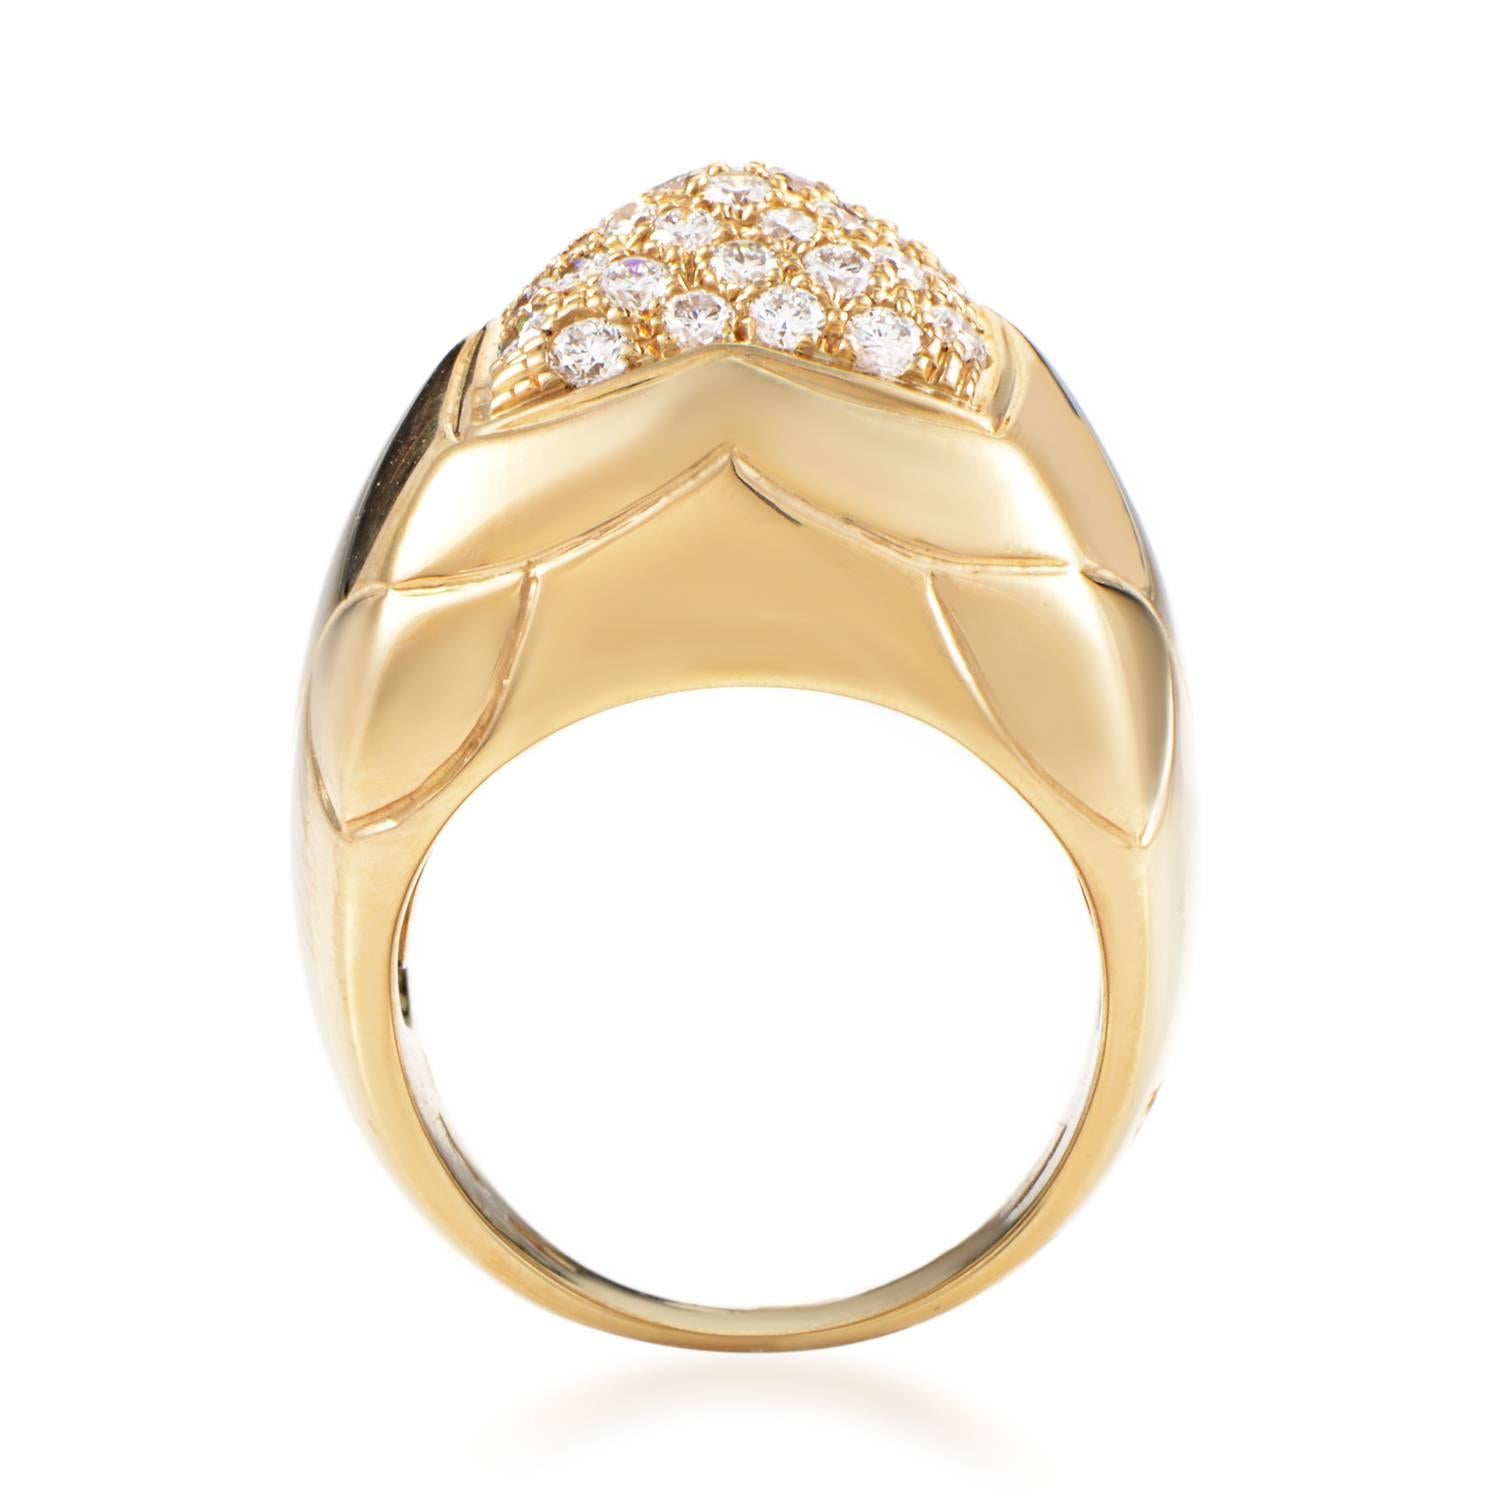 Instantly recognizable as one of the brand's esteemed aesthetic features, the compelling pyramidal shape of this exceptional ring from Bulgari is topped off by sparkling diamonds against the spotless surface of luxurious 18K yellow gold.
Ring Size: